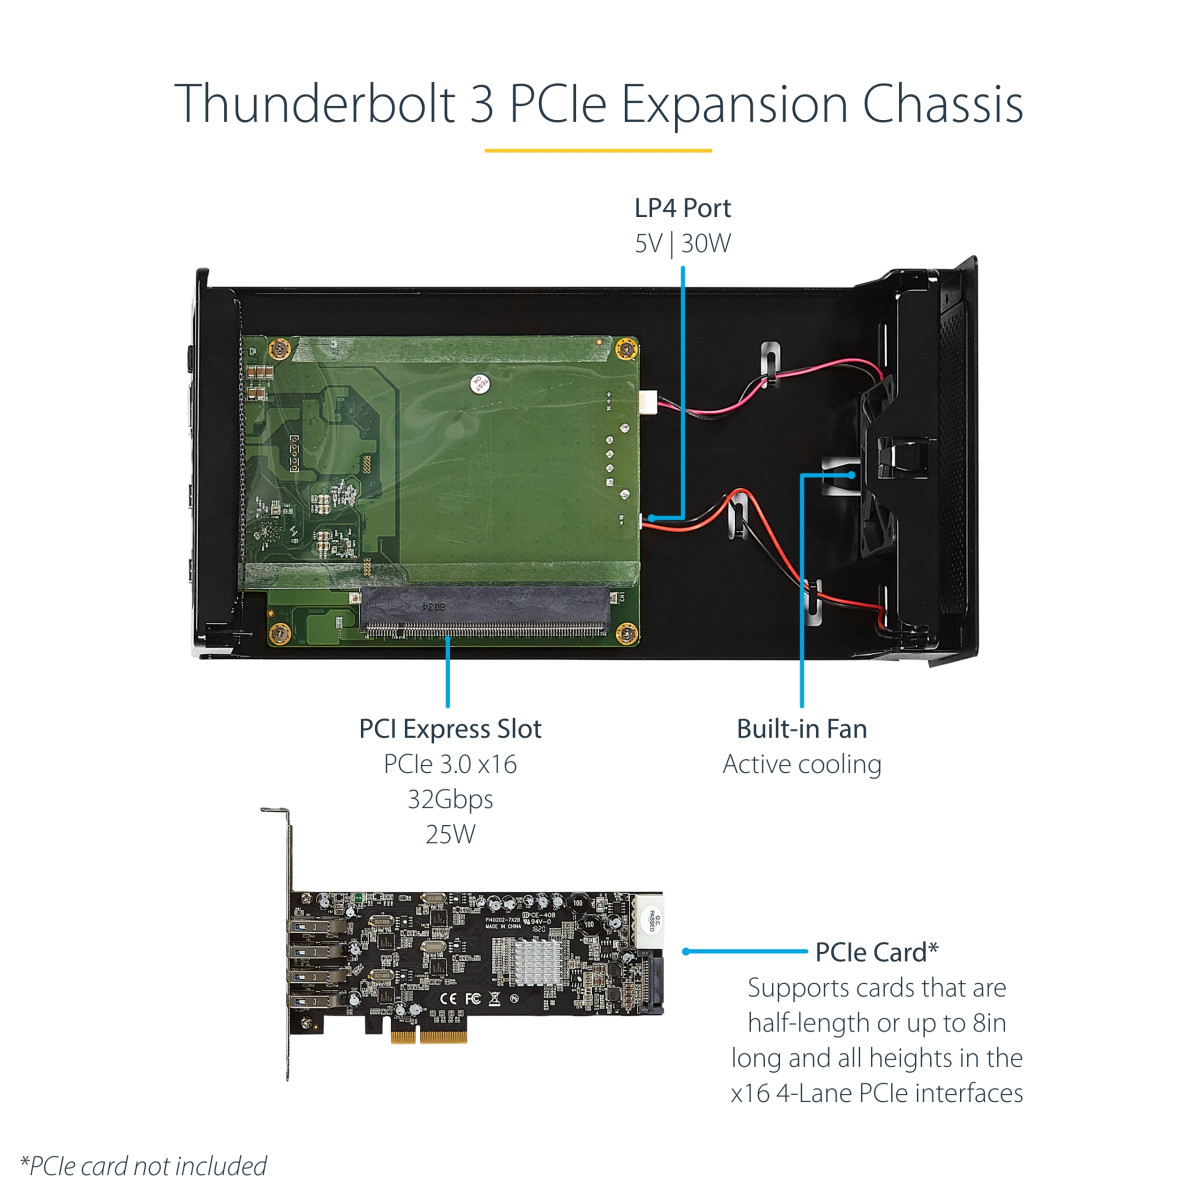 Thunderbolt 3 PCIe Expansion Chassis